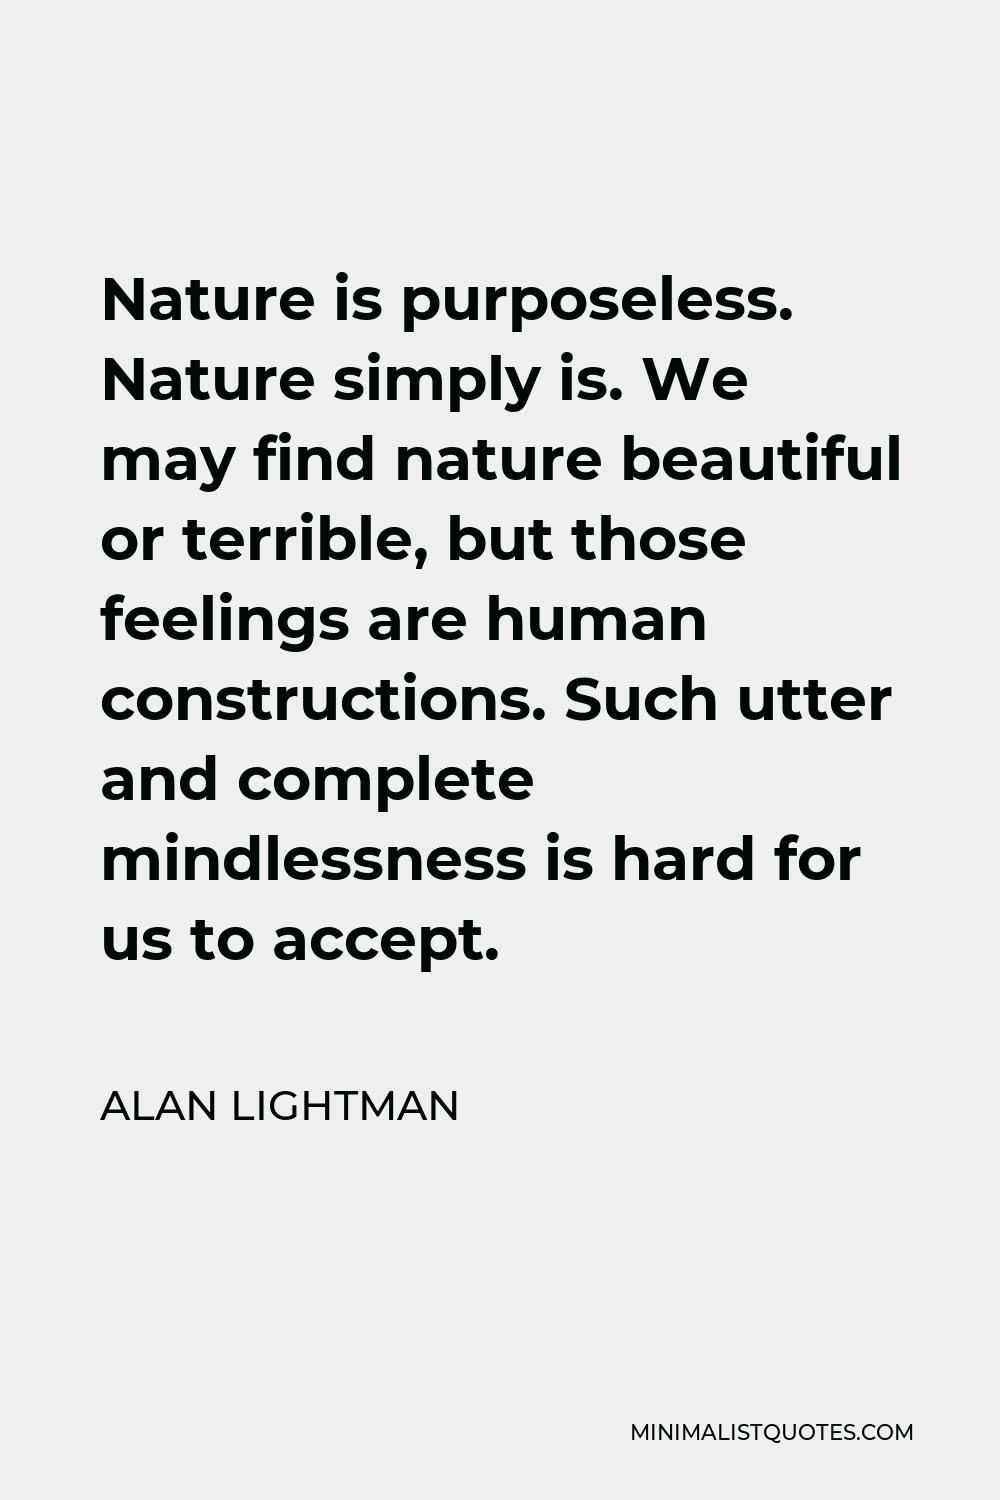 Alan Lightman Quote - Nature is purposeless. Nature simply is. We may find nature beautiful or terrible, but those feelings are human constructions. Such utter and complete mindlessness is hard for us to accept.